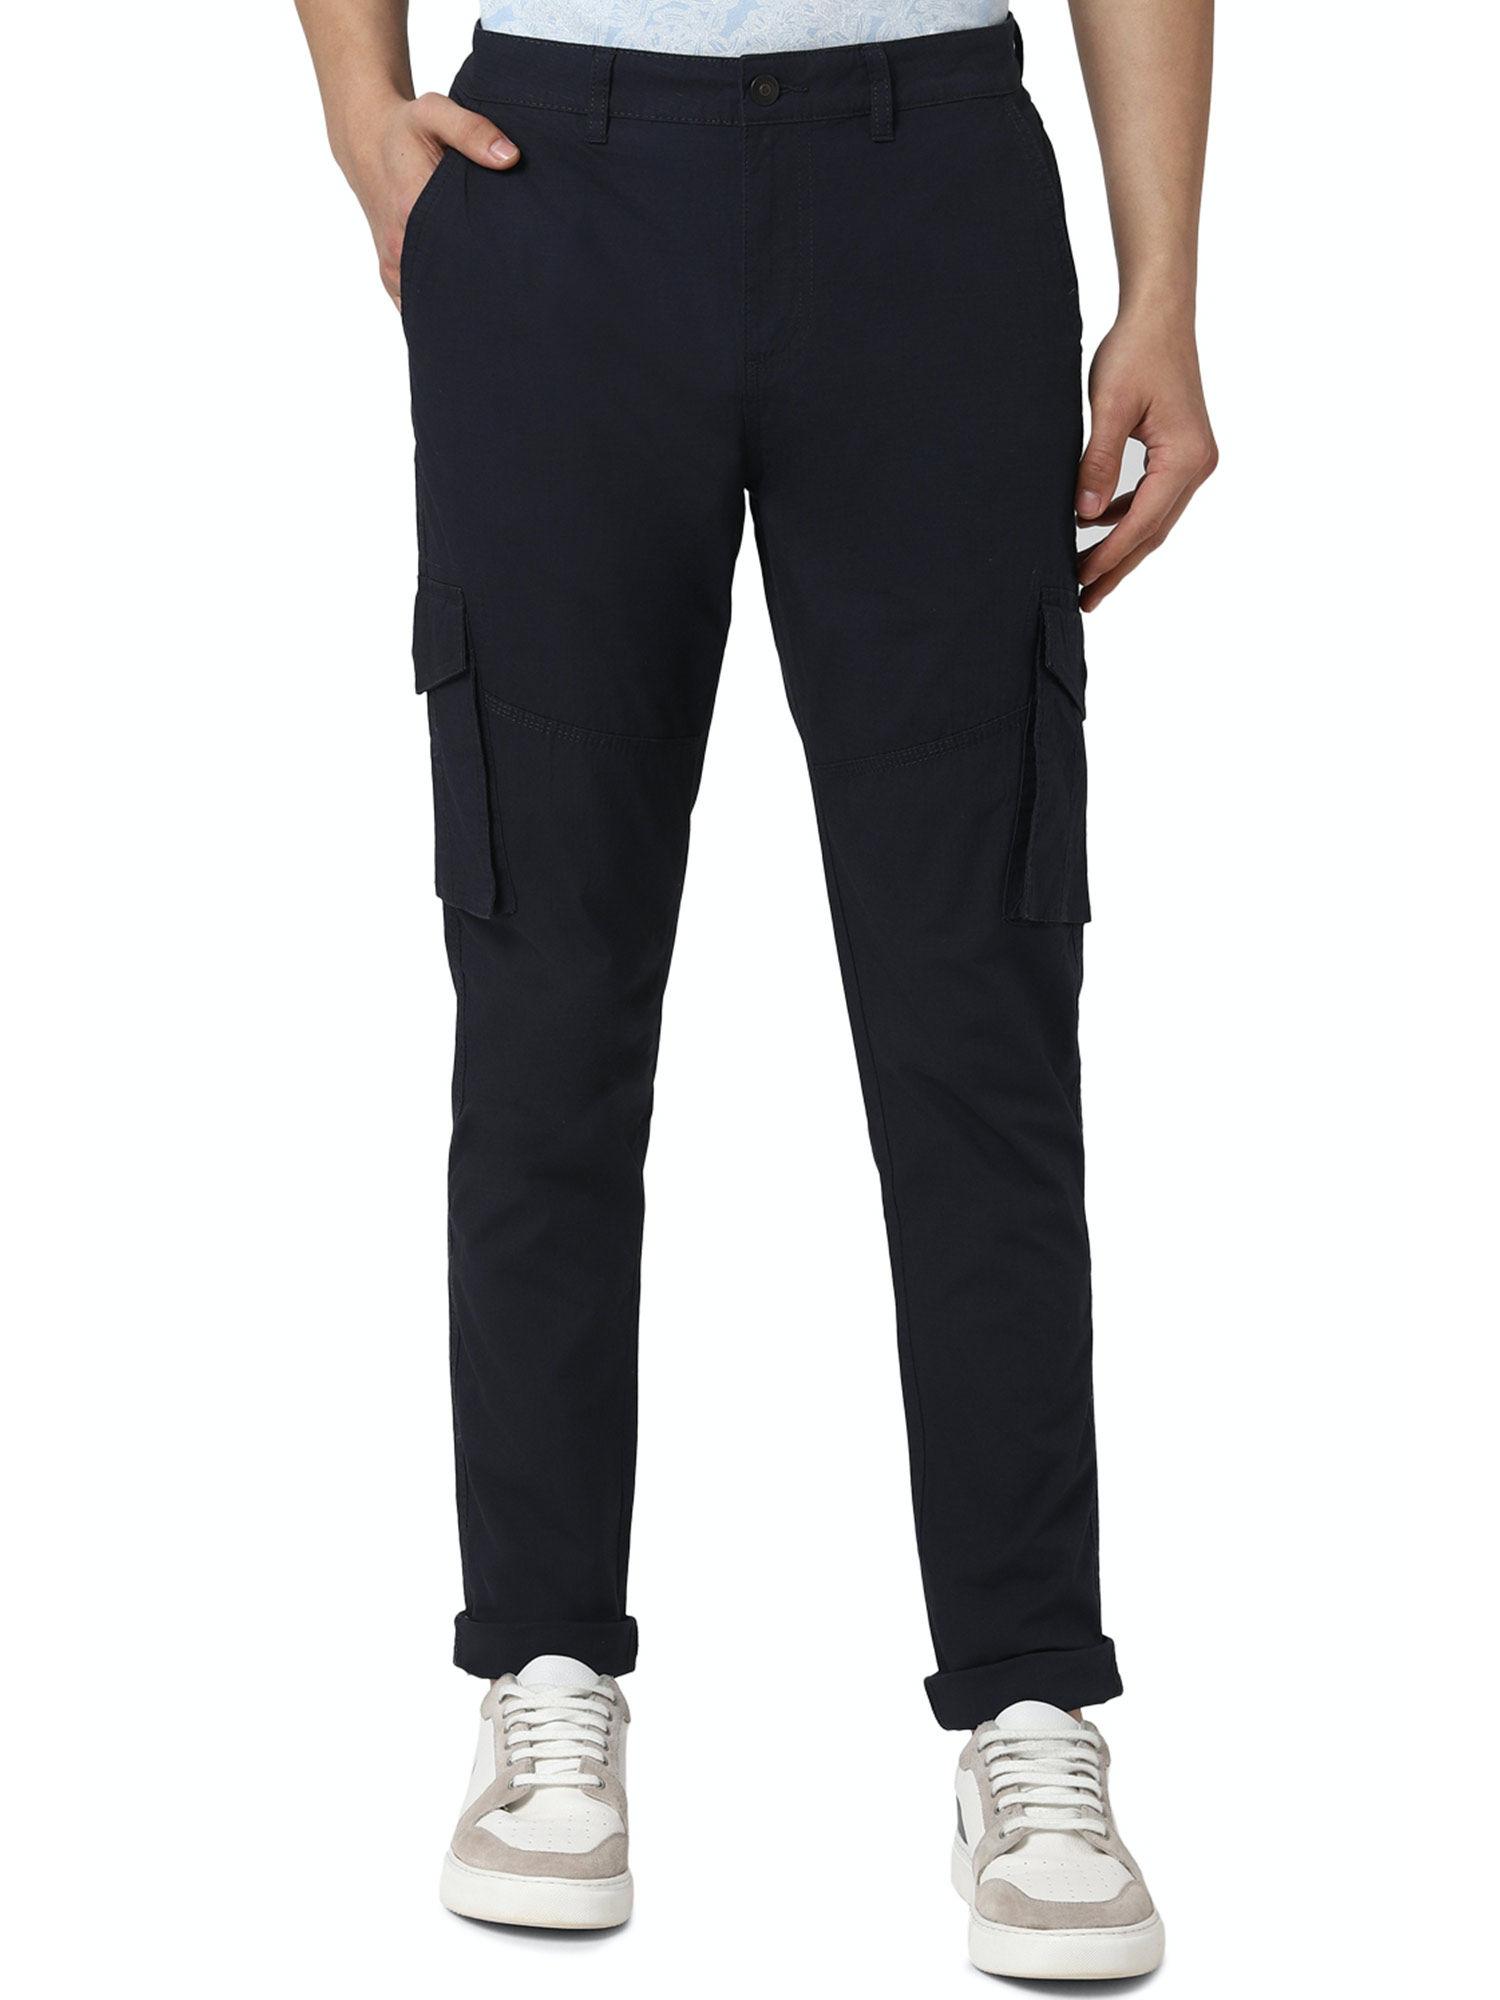 navy blue solid casual trouser